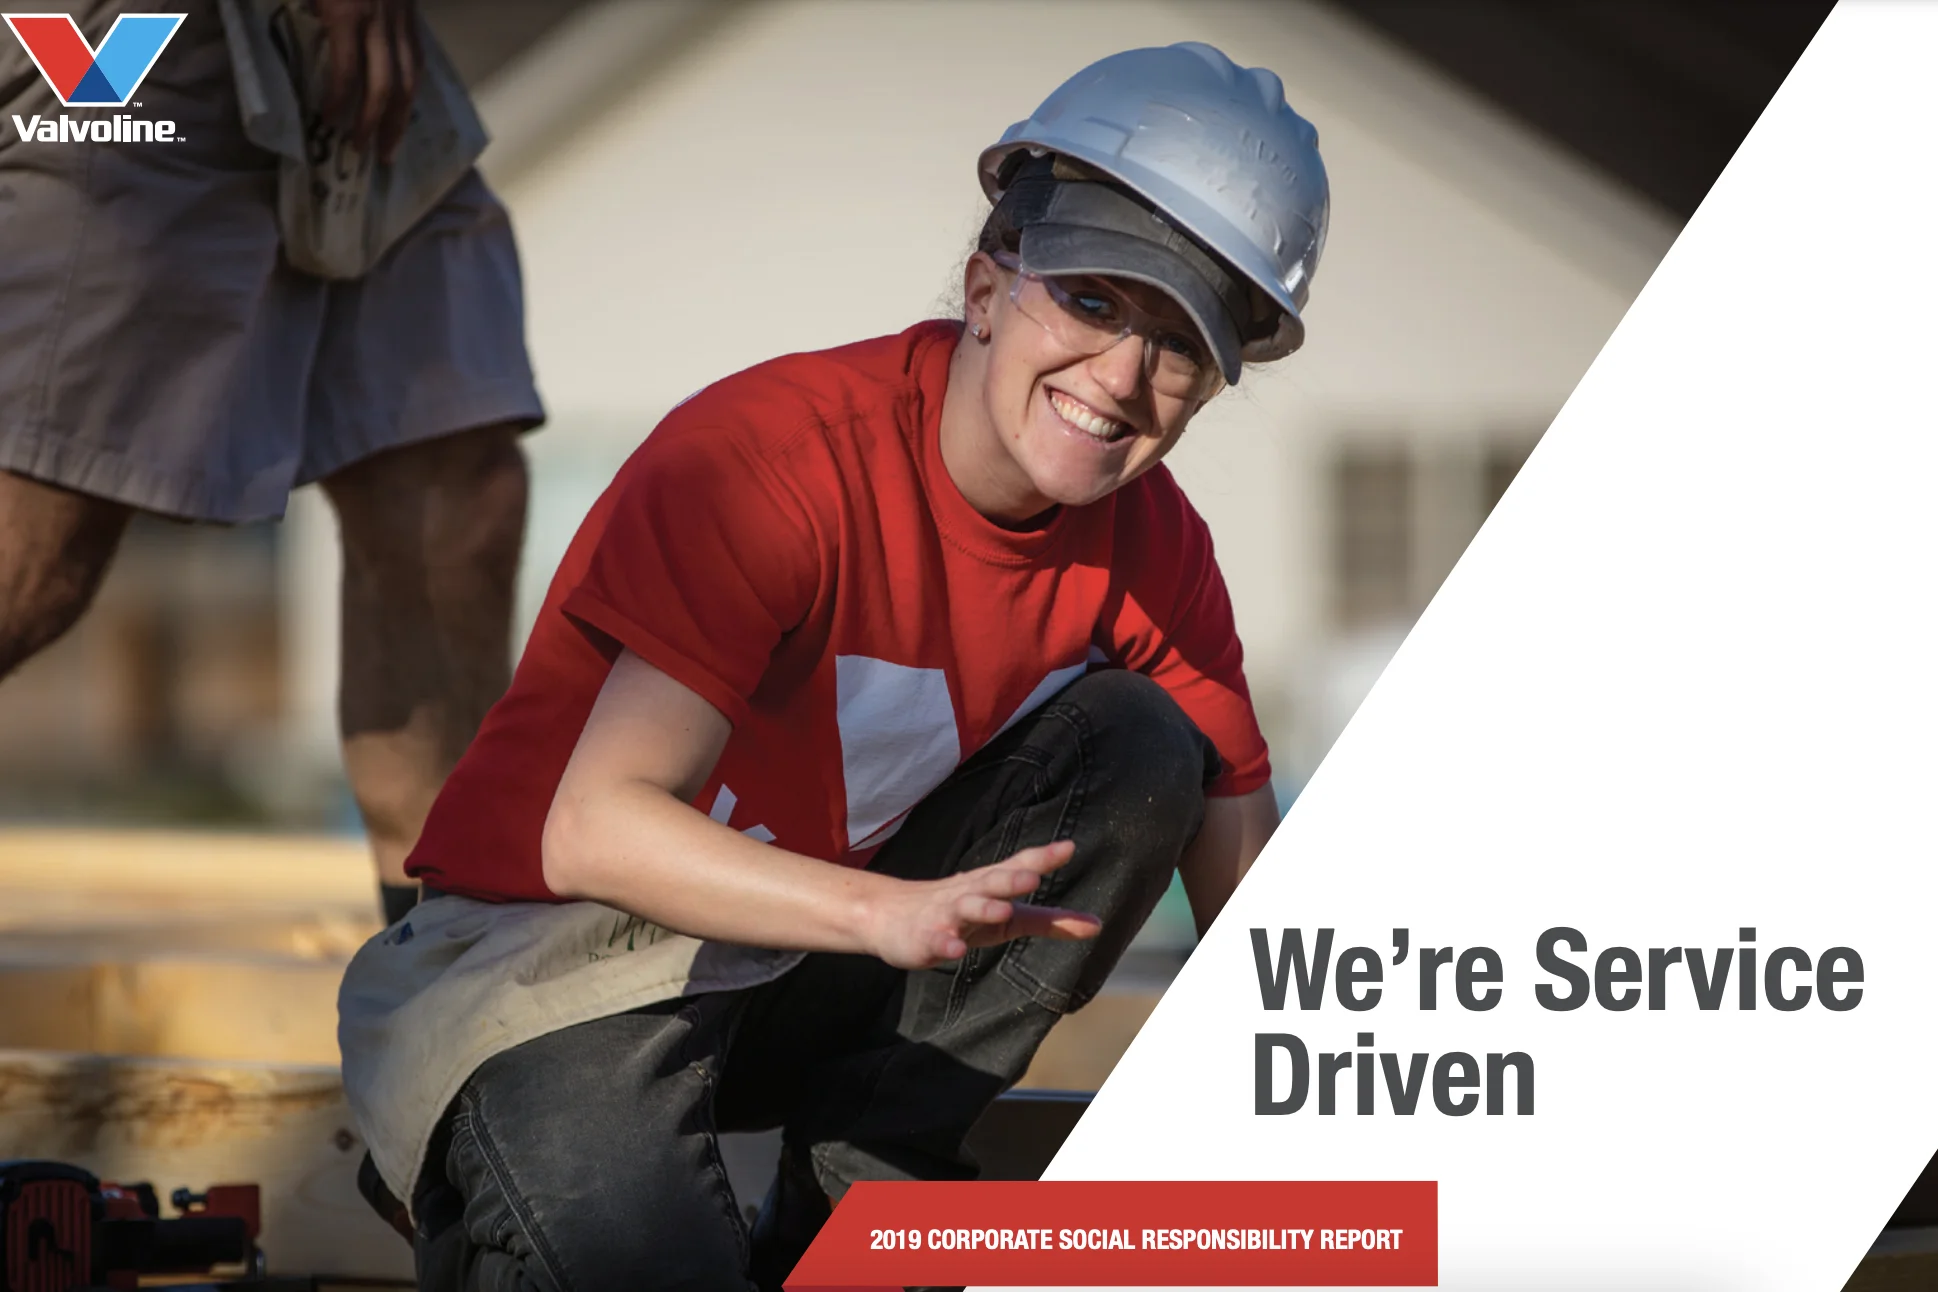 Valvoline Releases Its Corporate Social Responsibility (CSR) Report ‘We’re Service Driven’